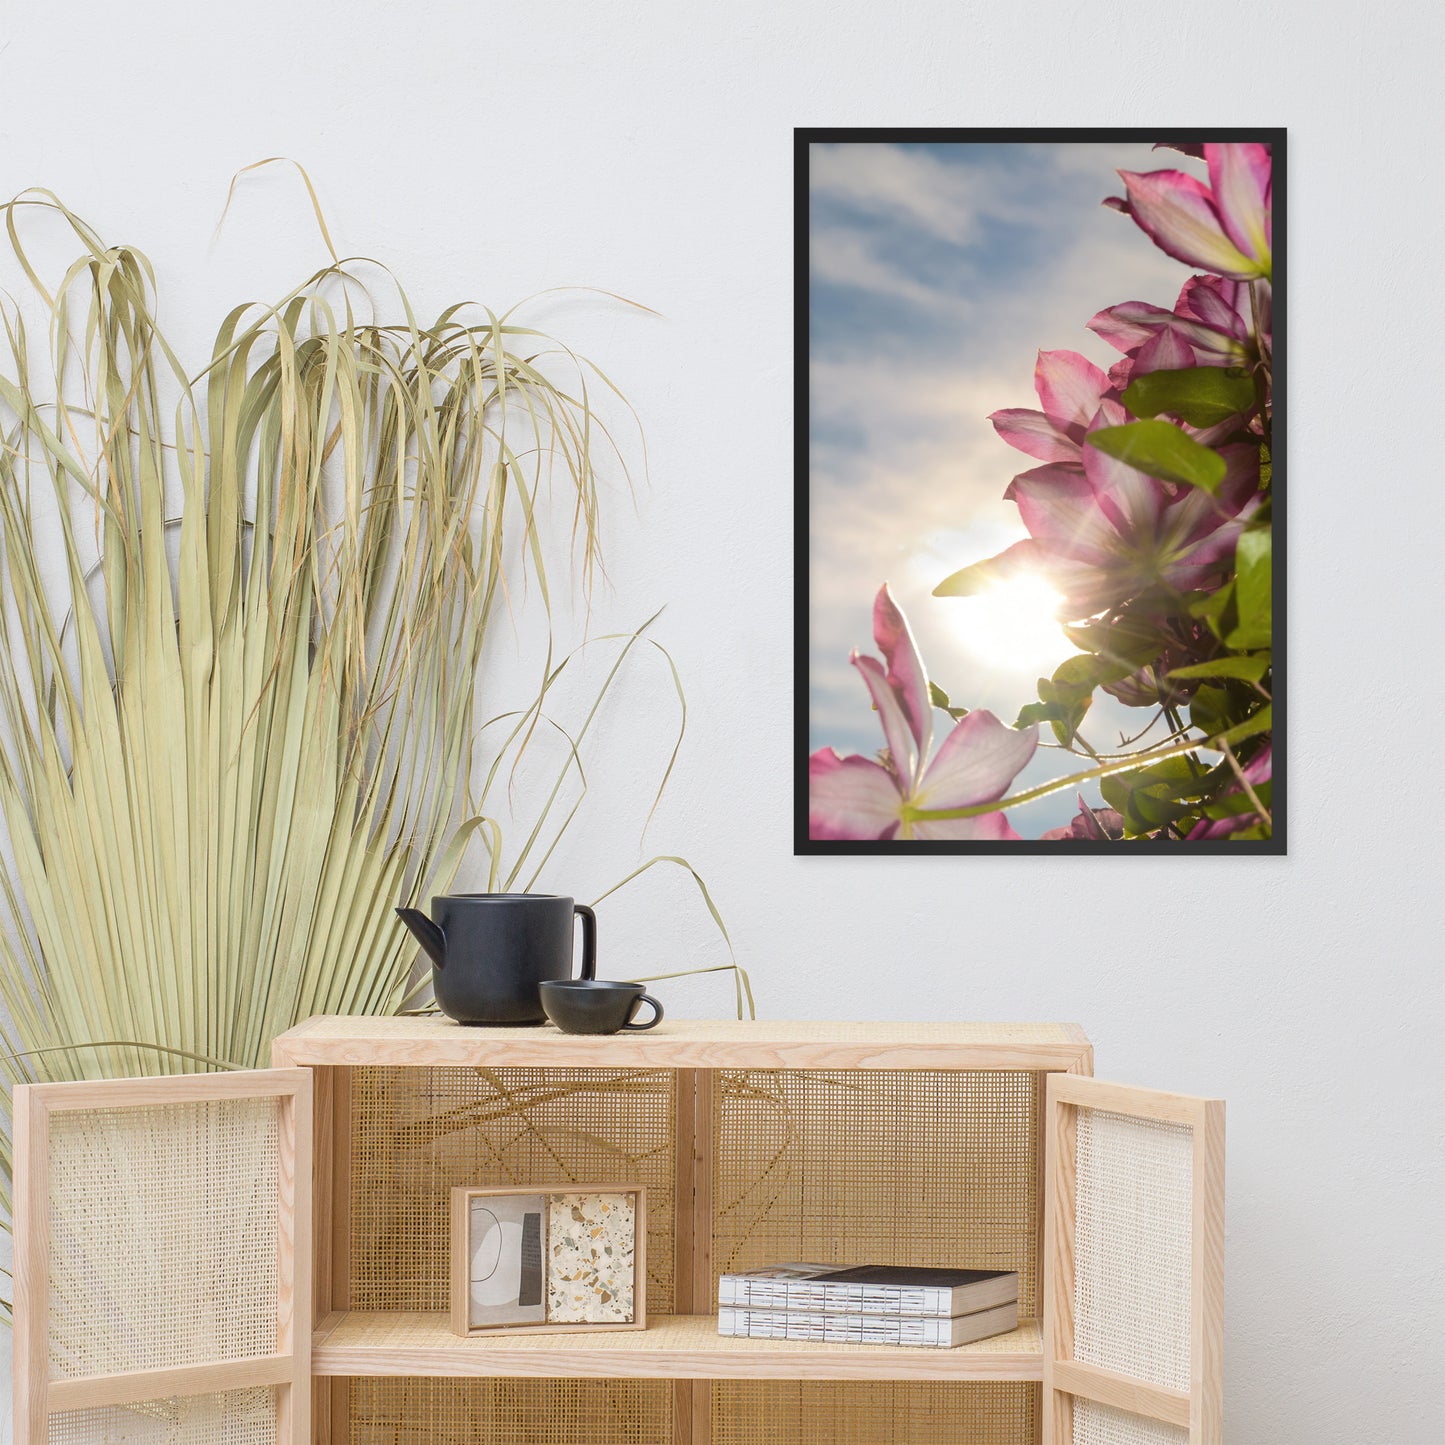 Towering Clematis Floral Nature Photo Framed Wall Art Print